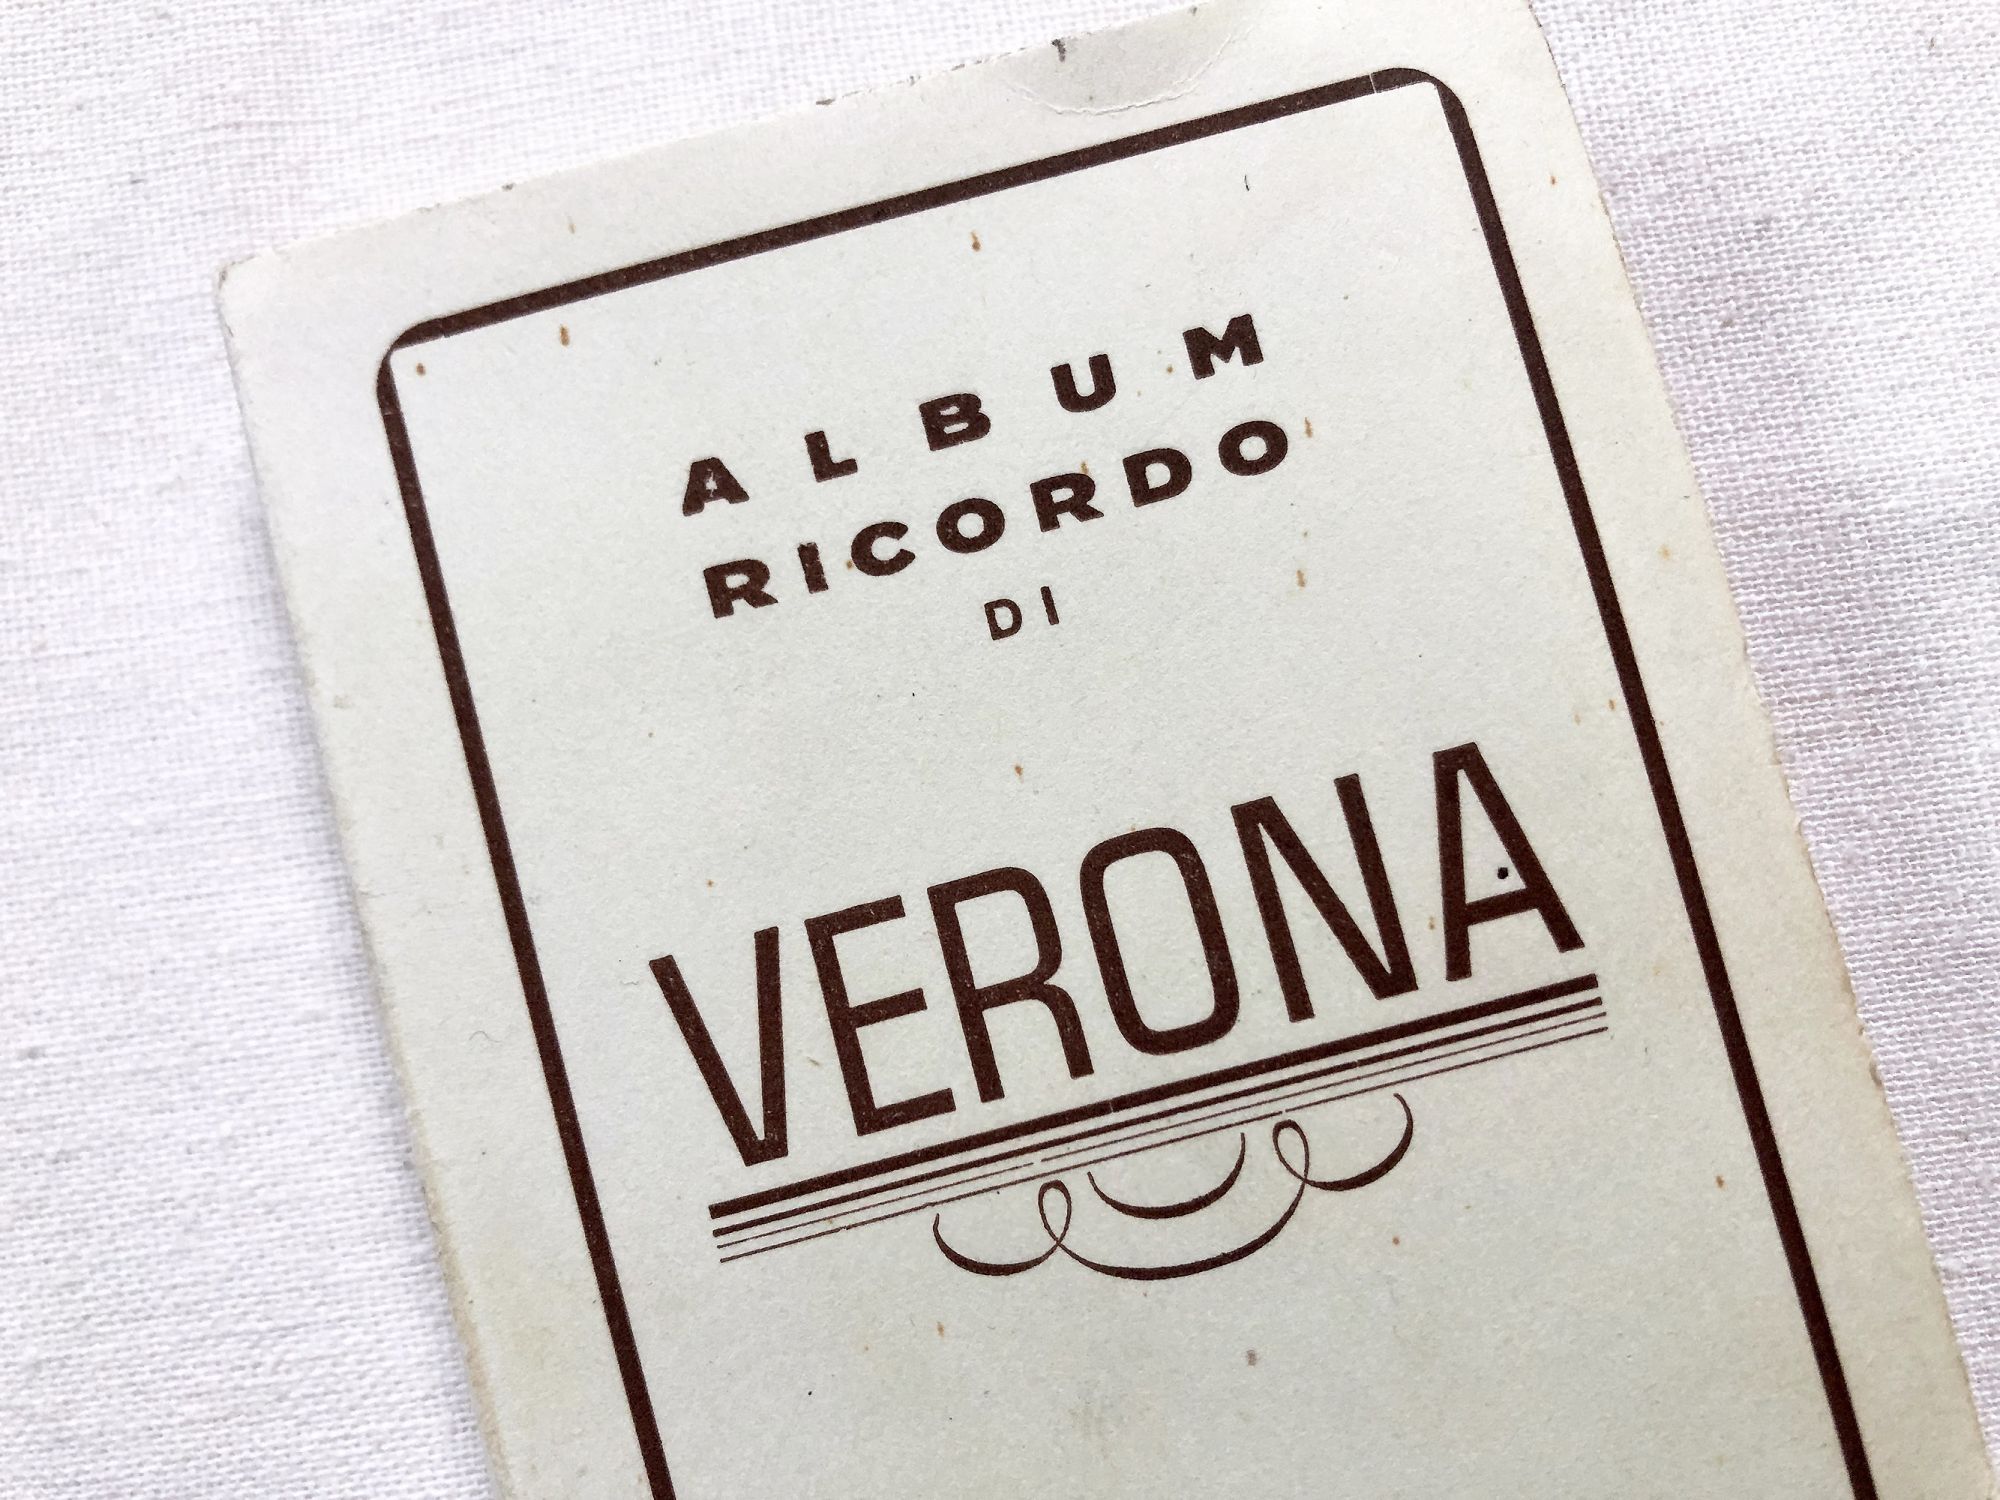 Set of 20 photos of of the city of Verona in Italy in the 1950s